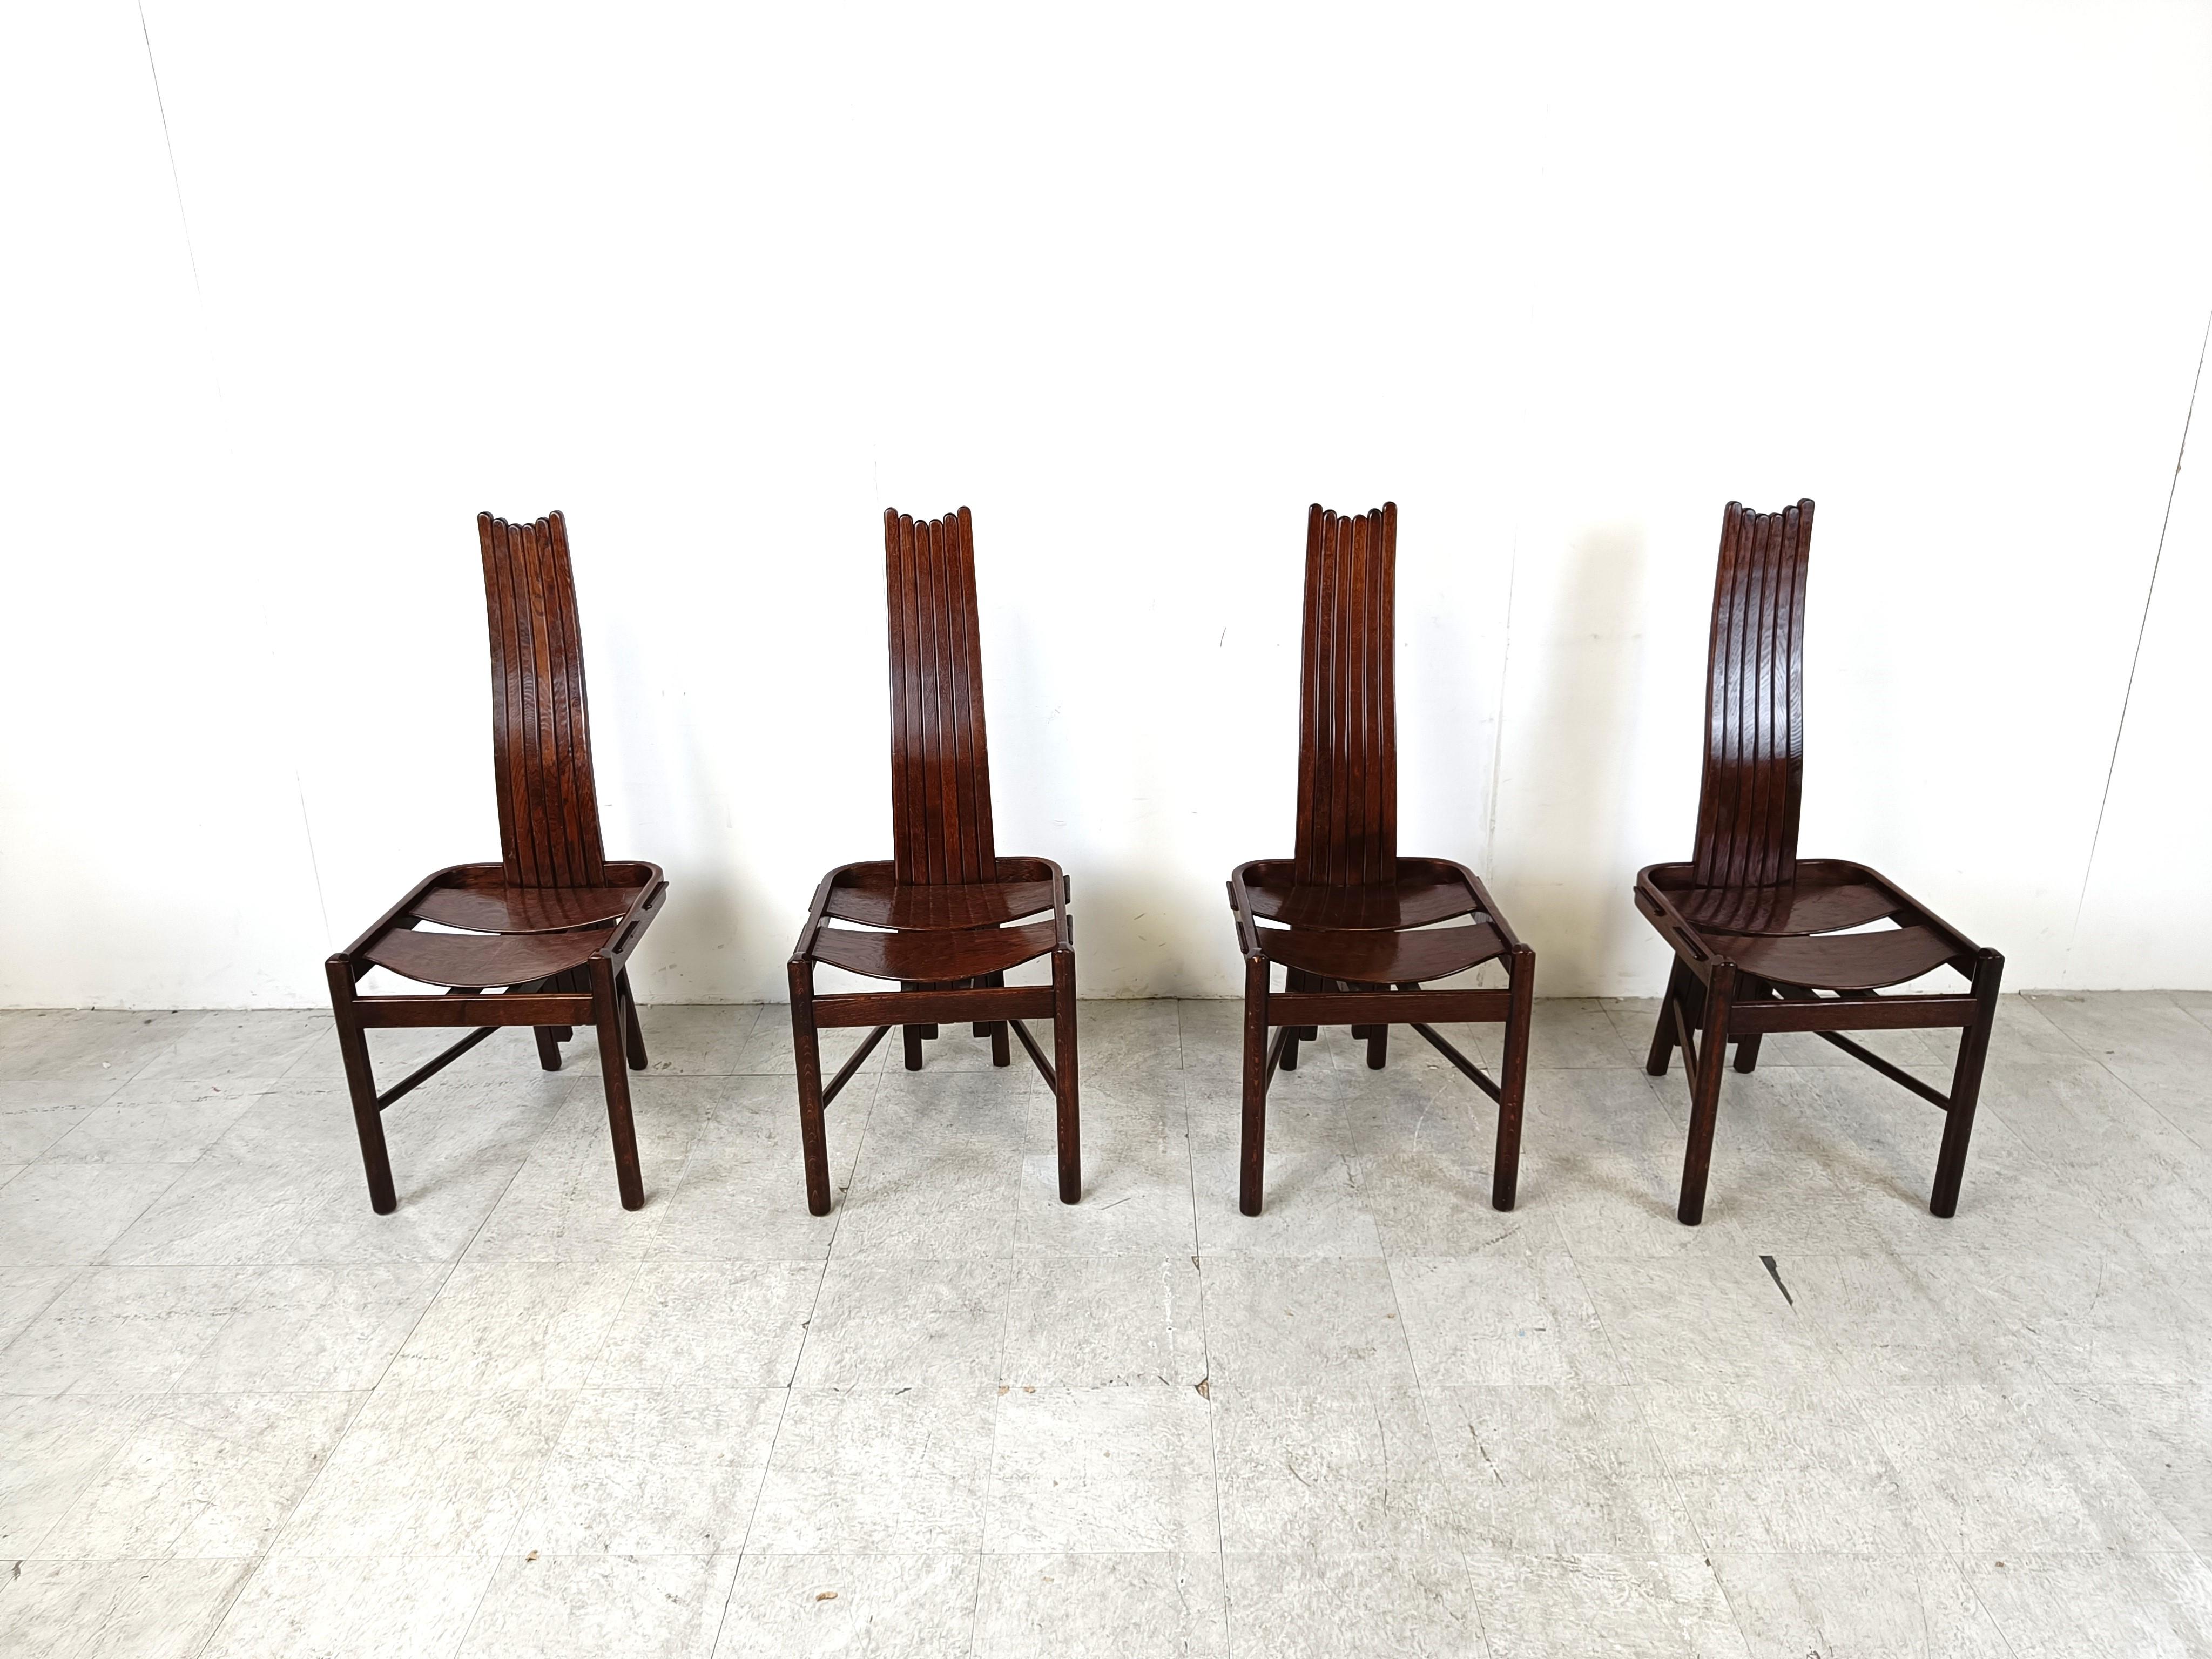 Set of 4 steam bent oak dining chairs by Allmilmö.

Beautiful elegant frames with interlocking seat elements.

1980s - Germany

In good condition with age related wear.

Dimensions:
Height 112cm/44.09